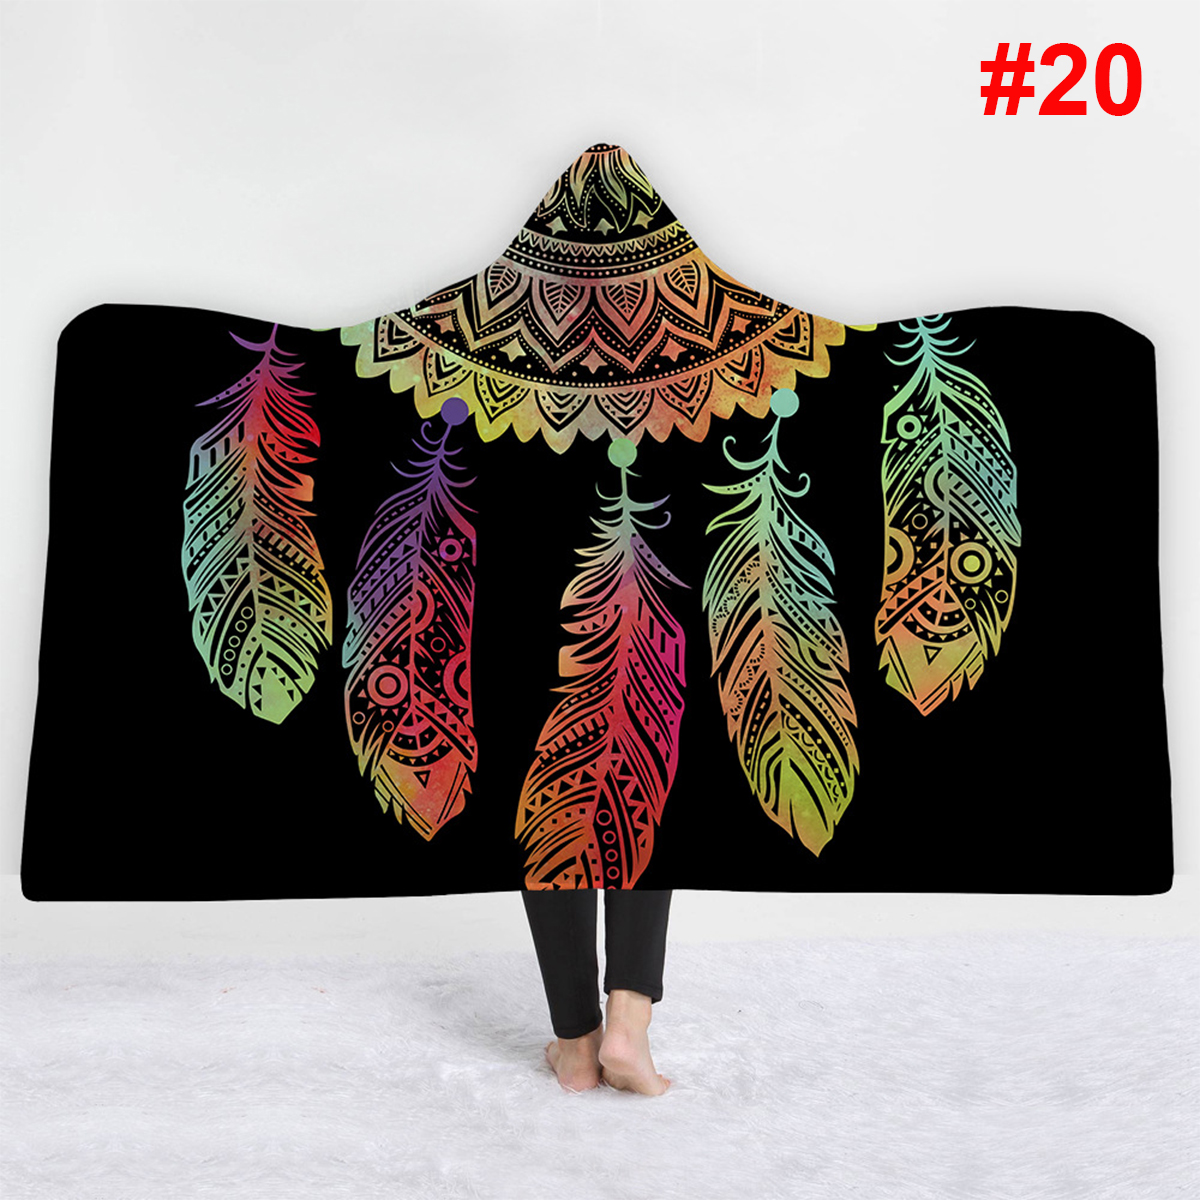 150x200cm-Bejirog-Hooded-Blanket-Adults-Child-Warm-Blankets-Wearable-Plush-Wrap-Mat-Thick-Nap-Soft-1636607-5